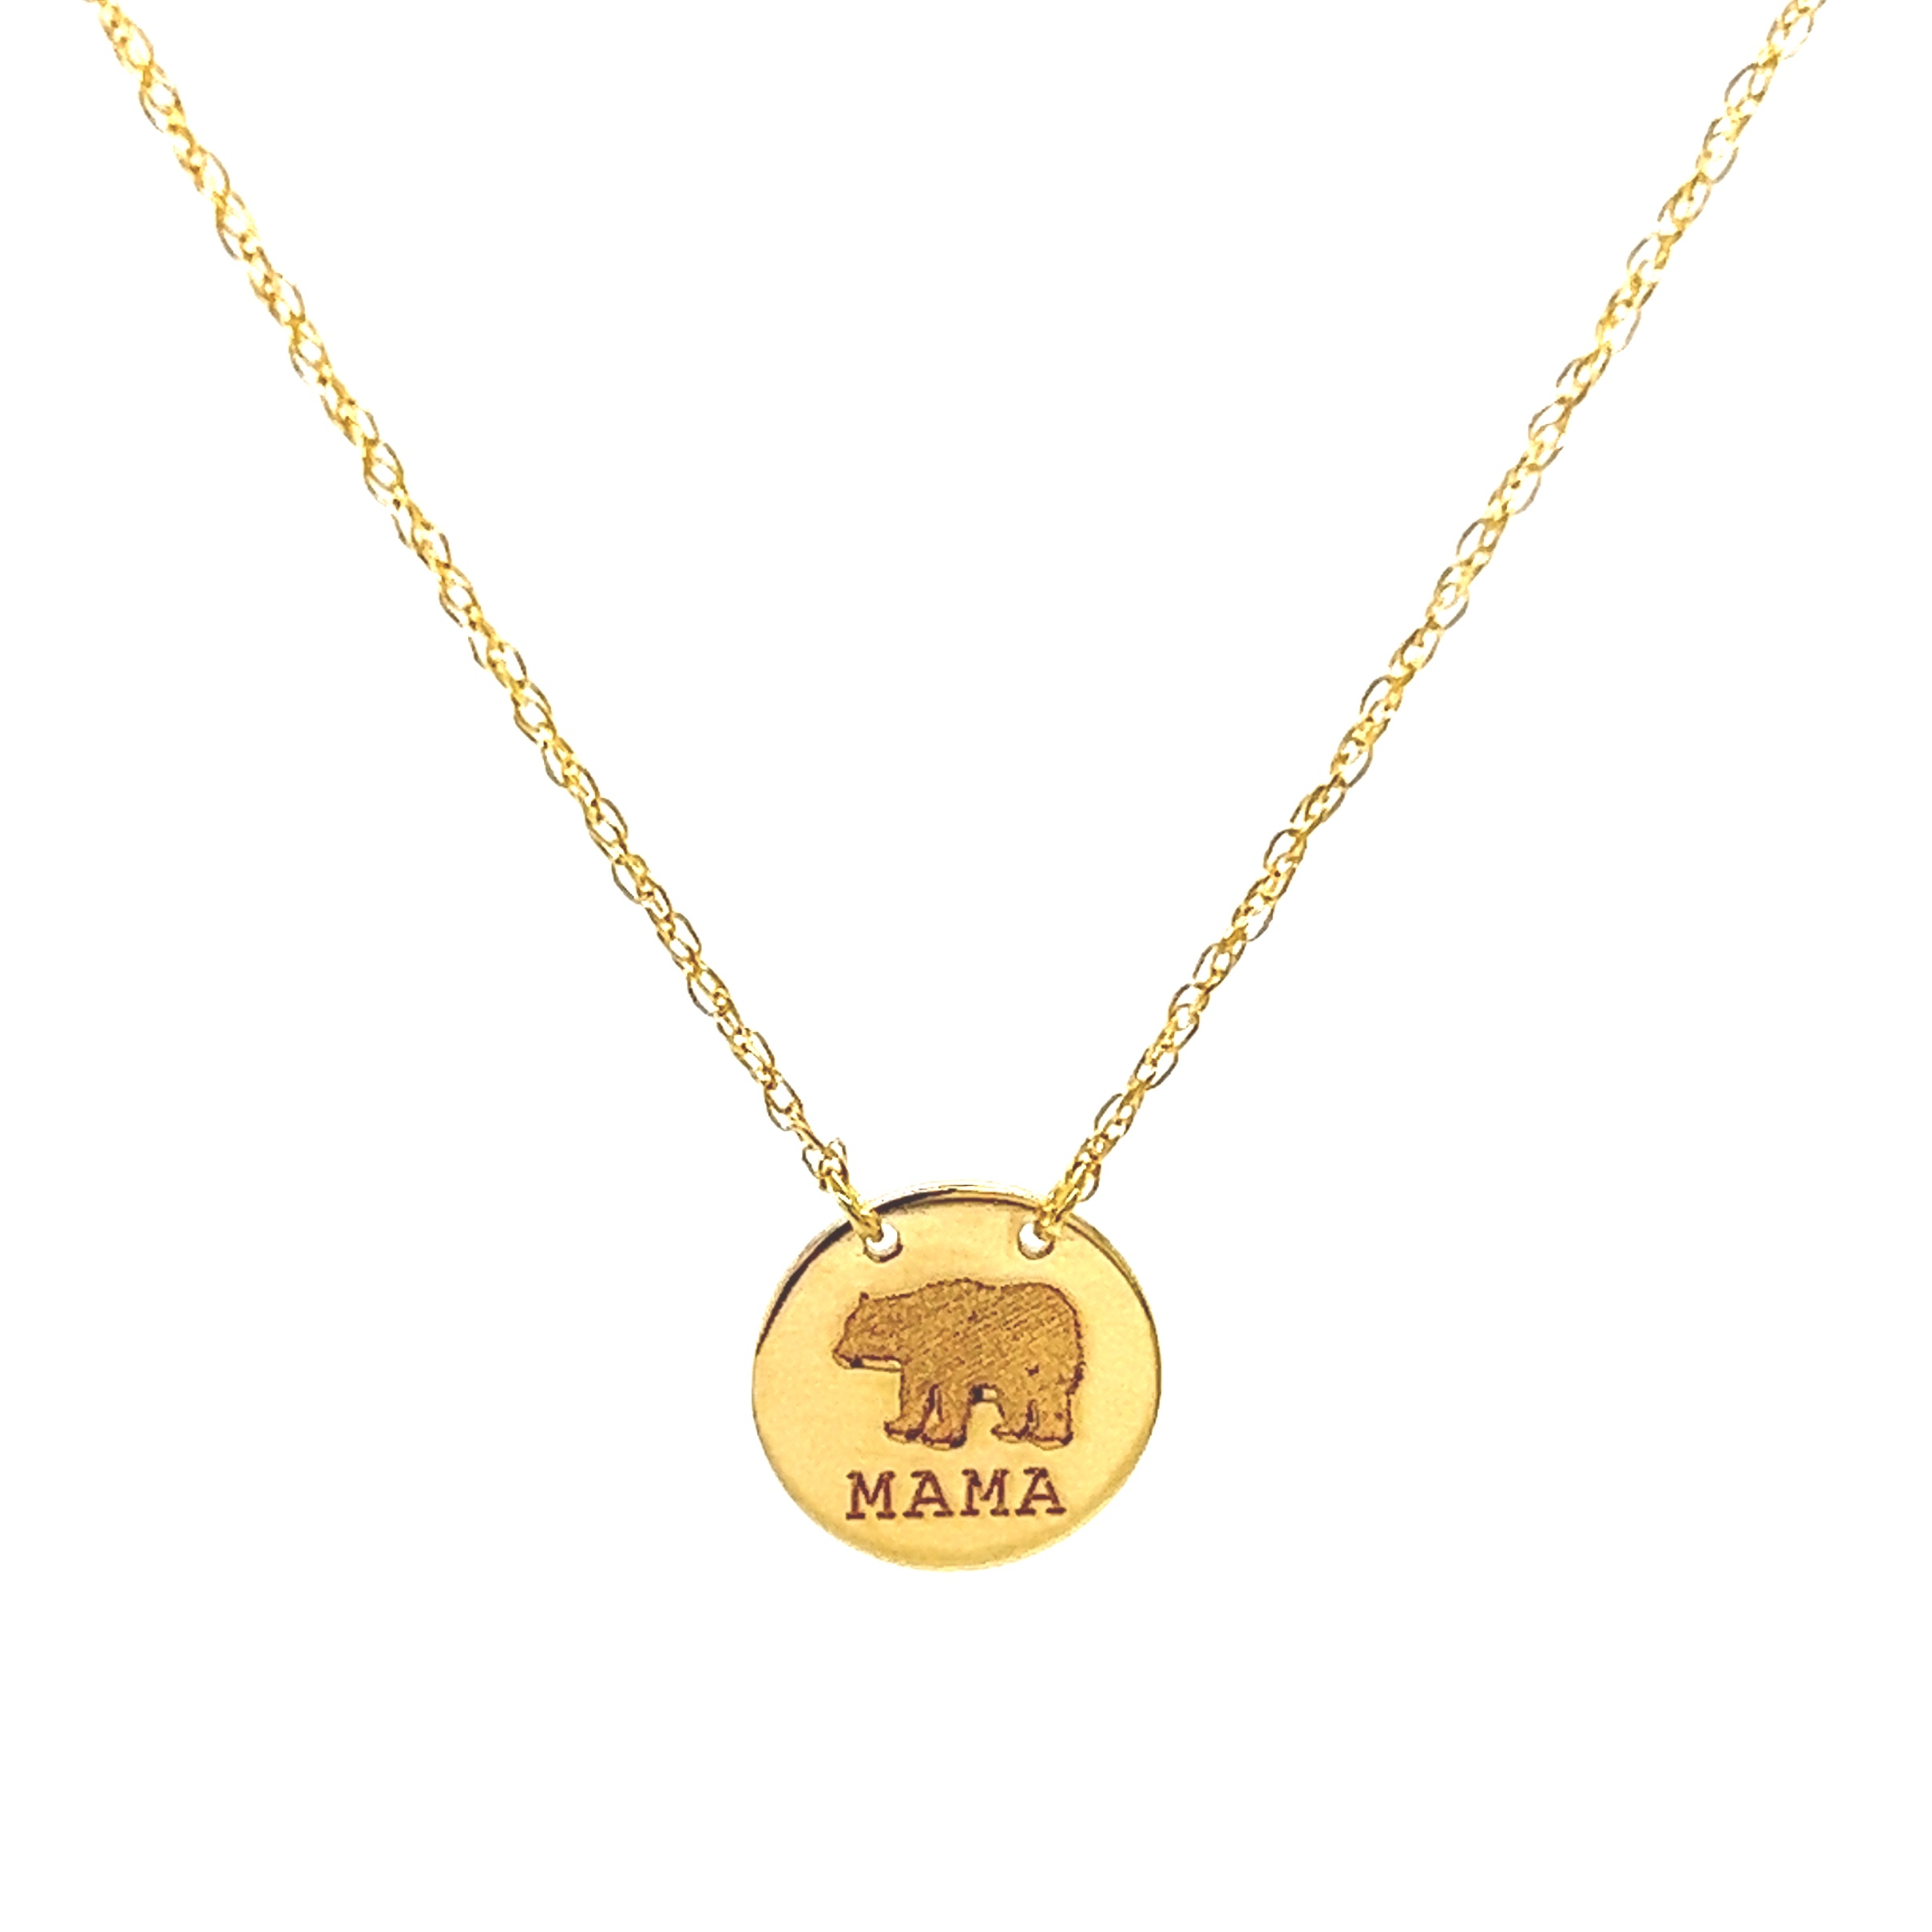 High Polish Mama Necklace in 14K Gold, 16-18